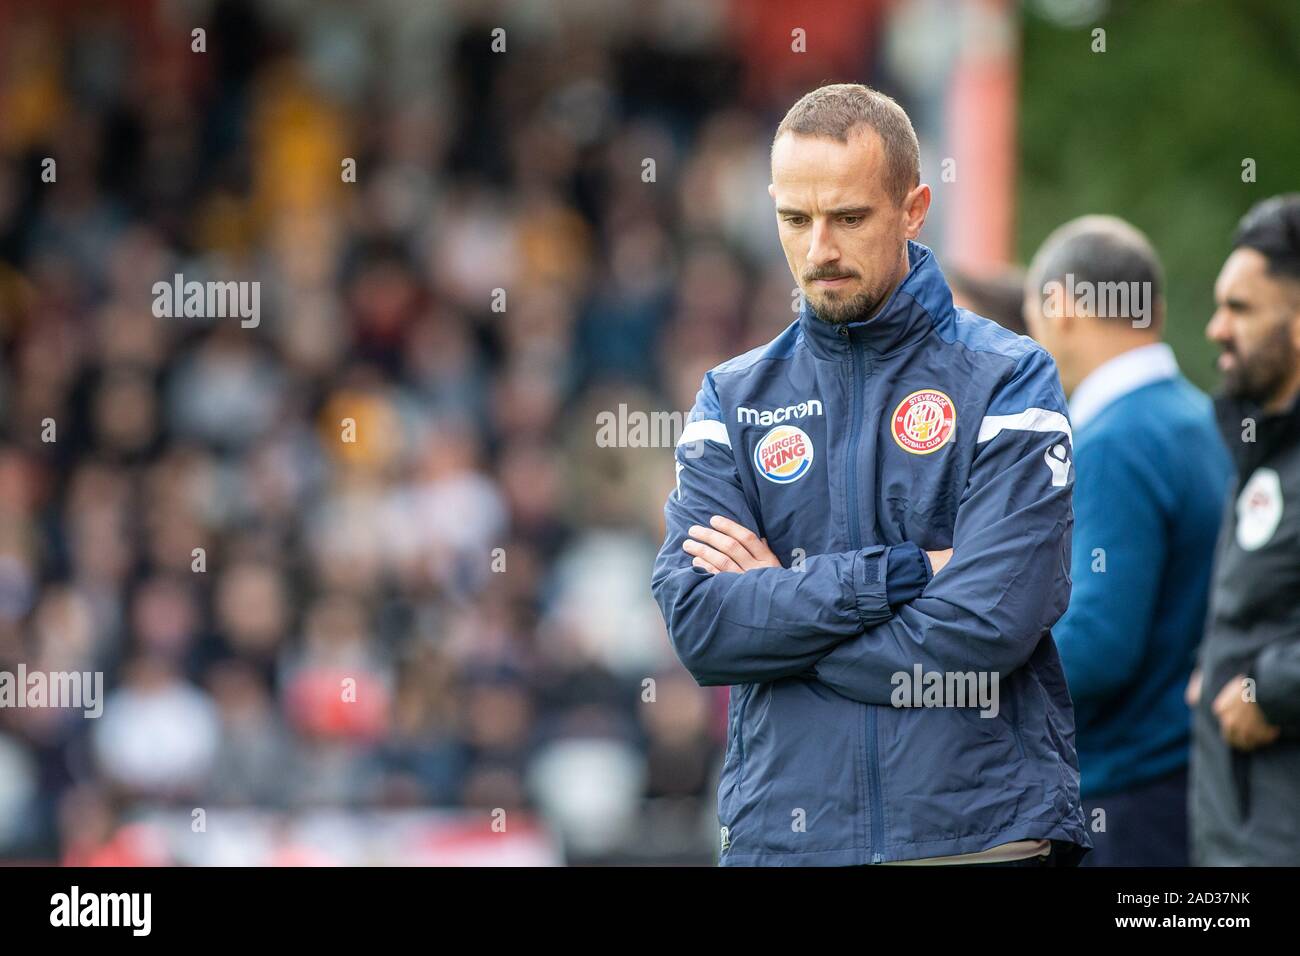 Mark Sampson, pitch side during game whilst manager of Stevenage Football Club Stock Photo